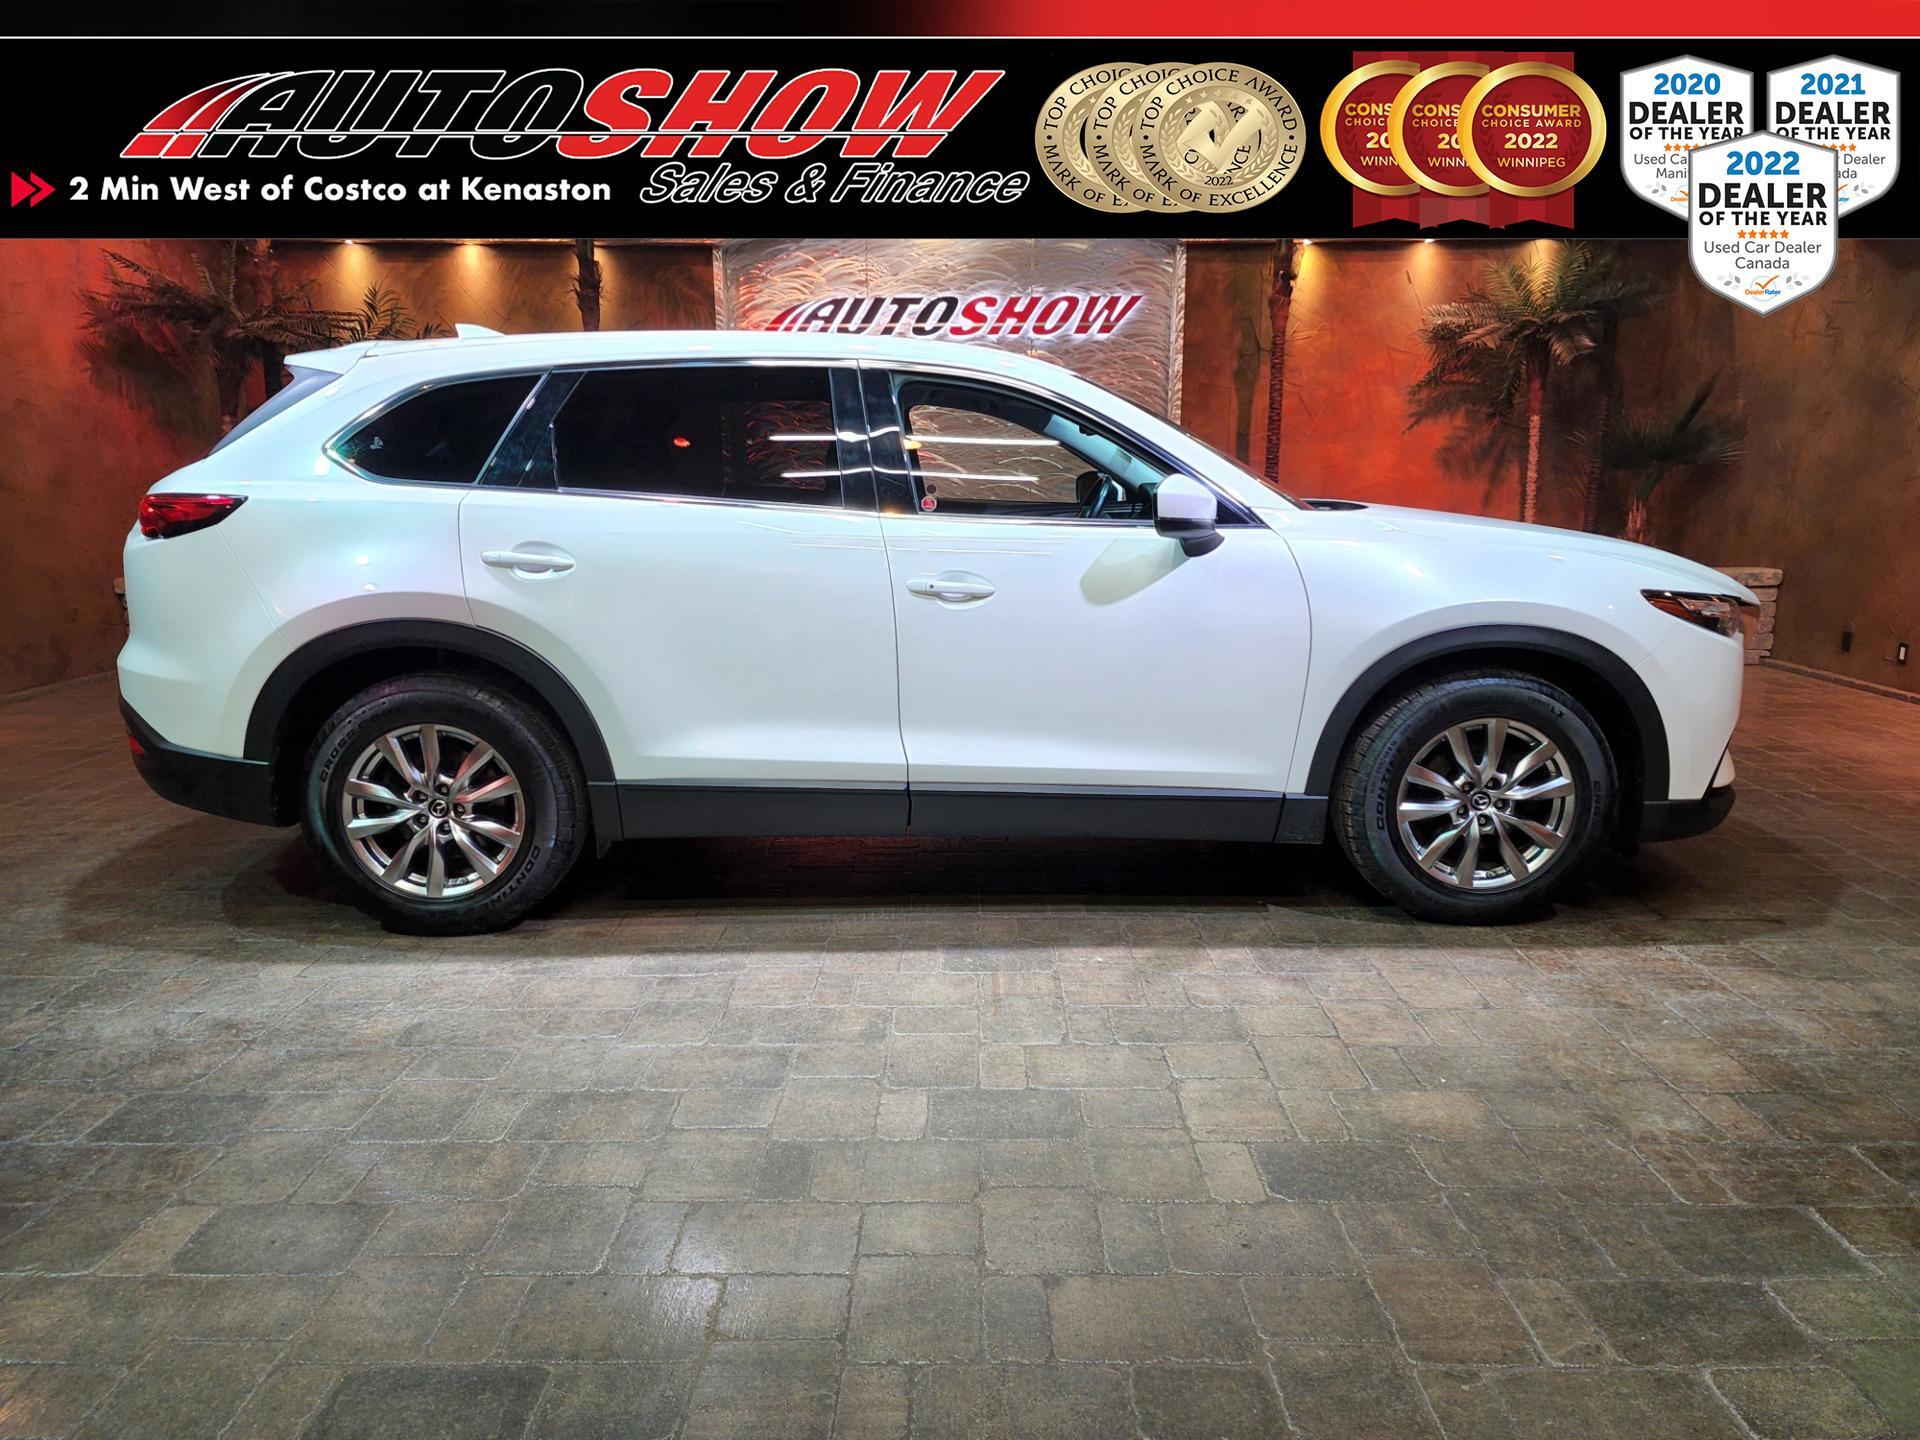 2018 Mazda CX-9 GS-L AWD - Sunroof, Htd Steering & Leather !!